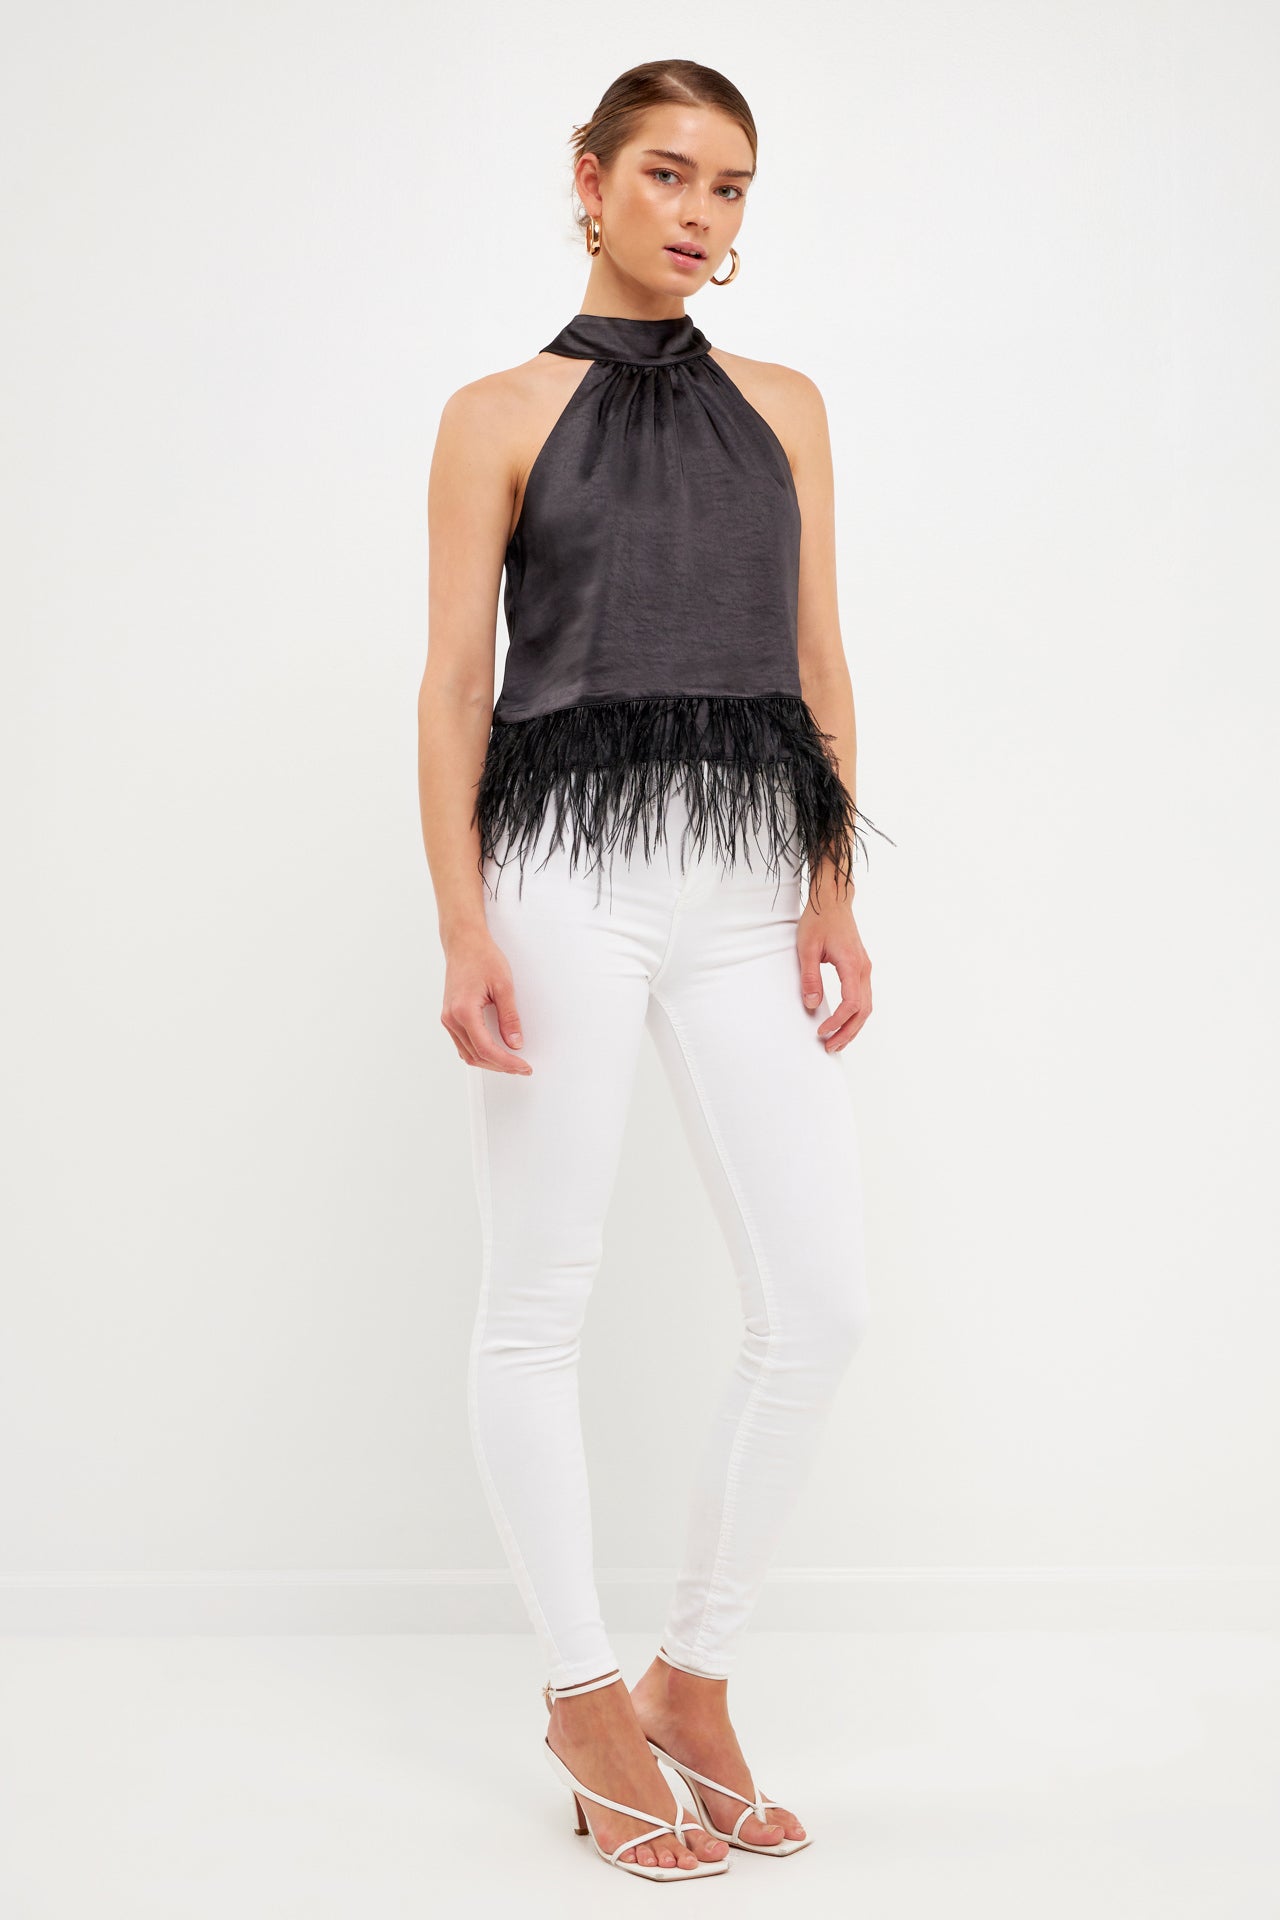 Endless Rose - Feather Trim Top - Tops in Women's Clothing available at endlessrose.com